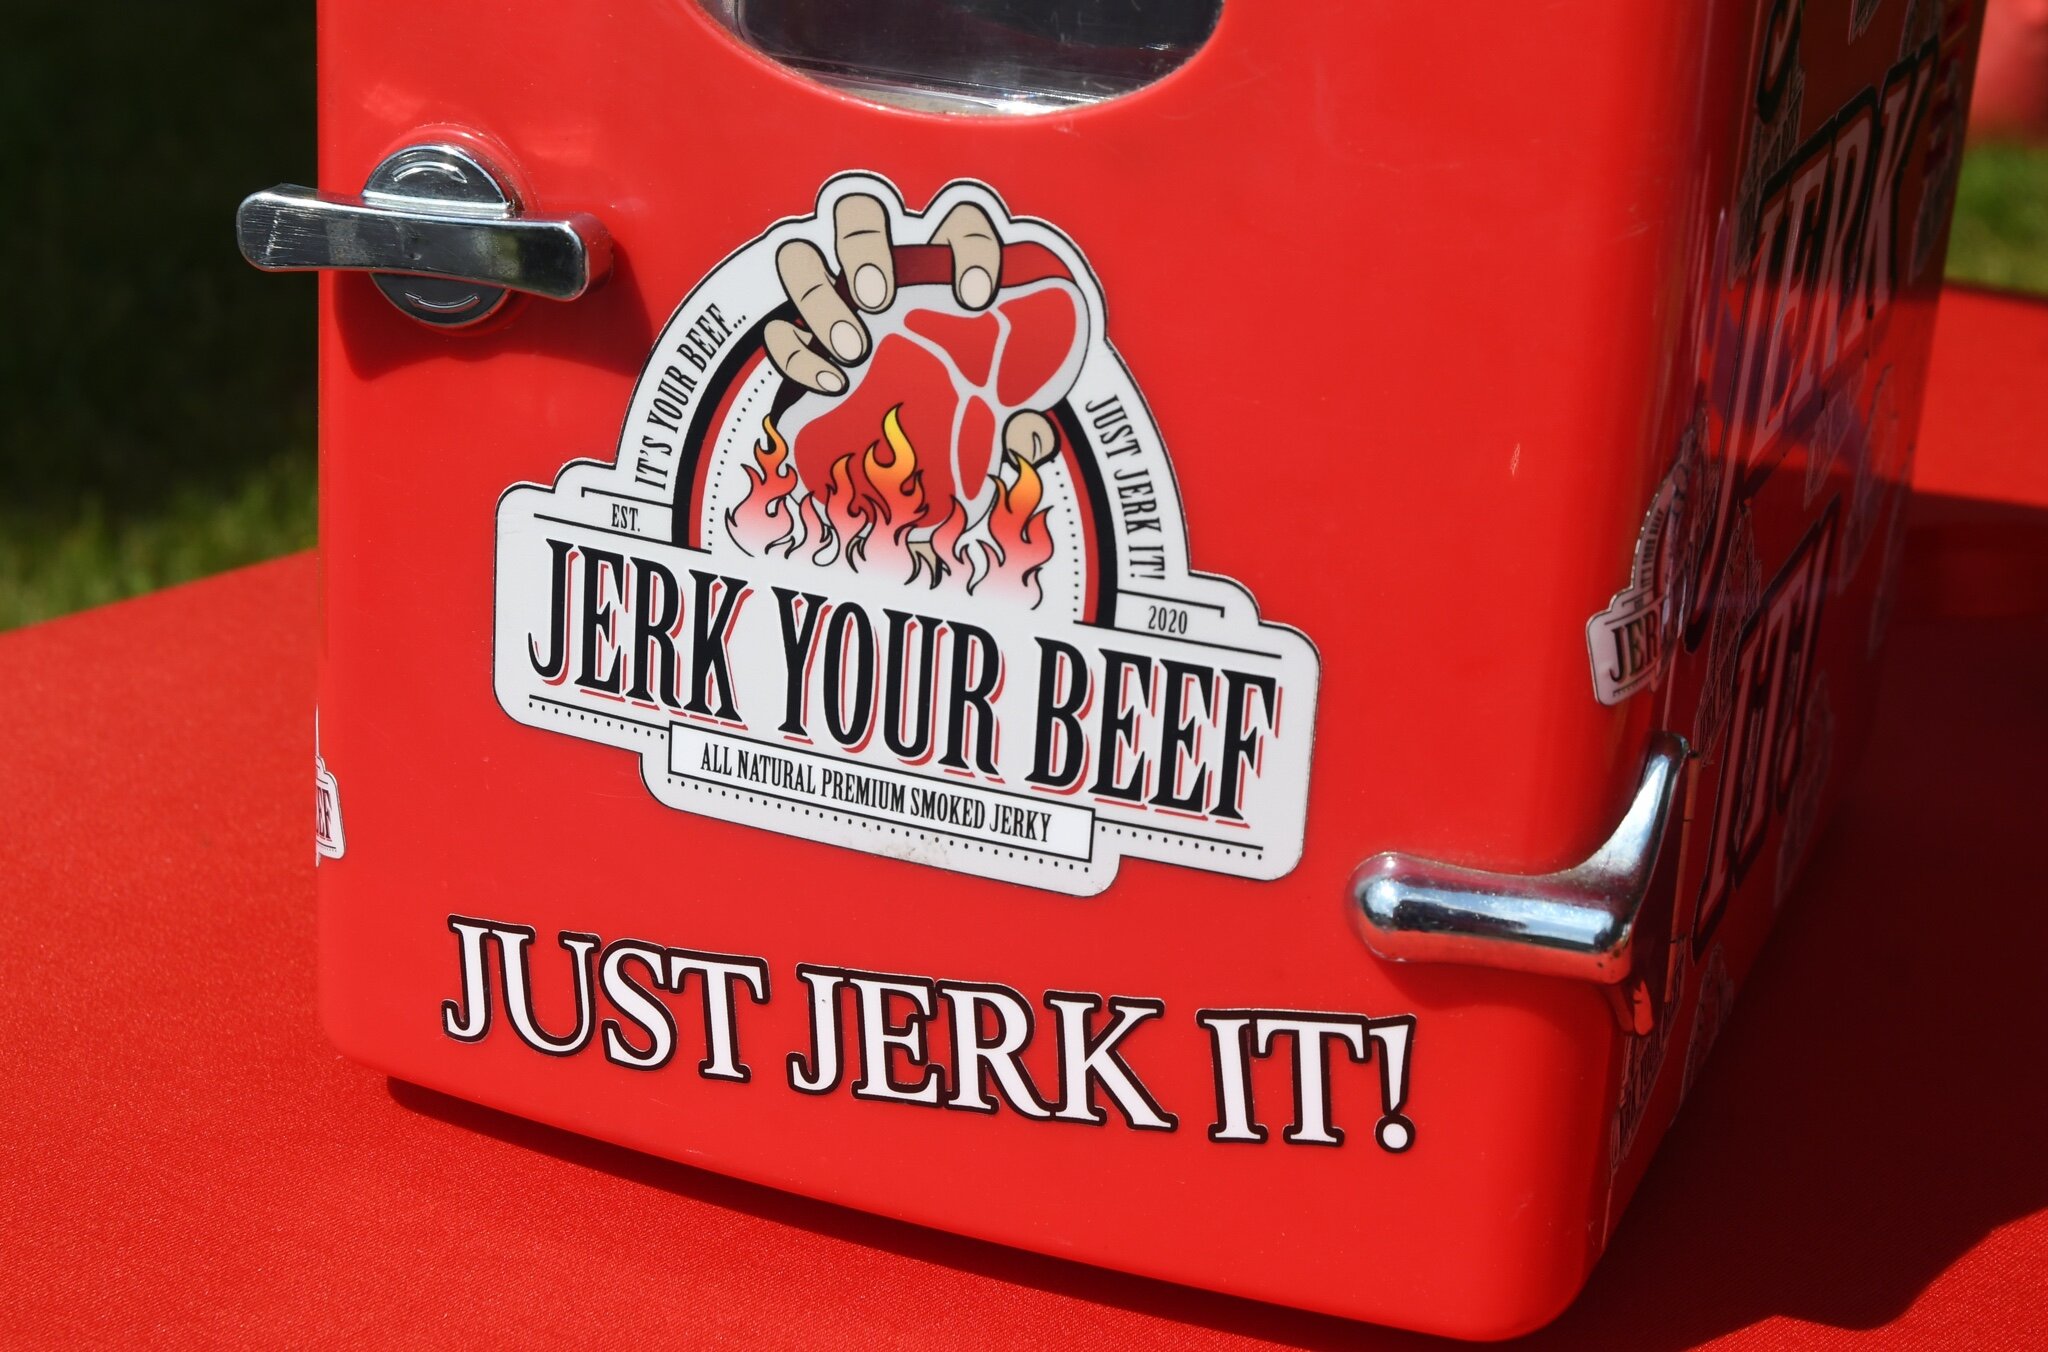 Here are some of the products made by Jerk Your Beef Jerky and sold at area farmers’ markets like this one in Richland.